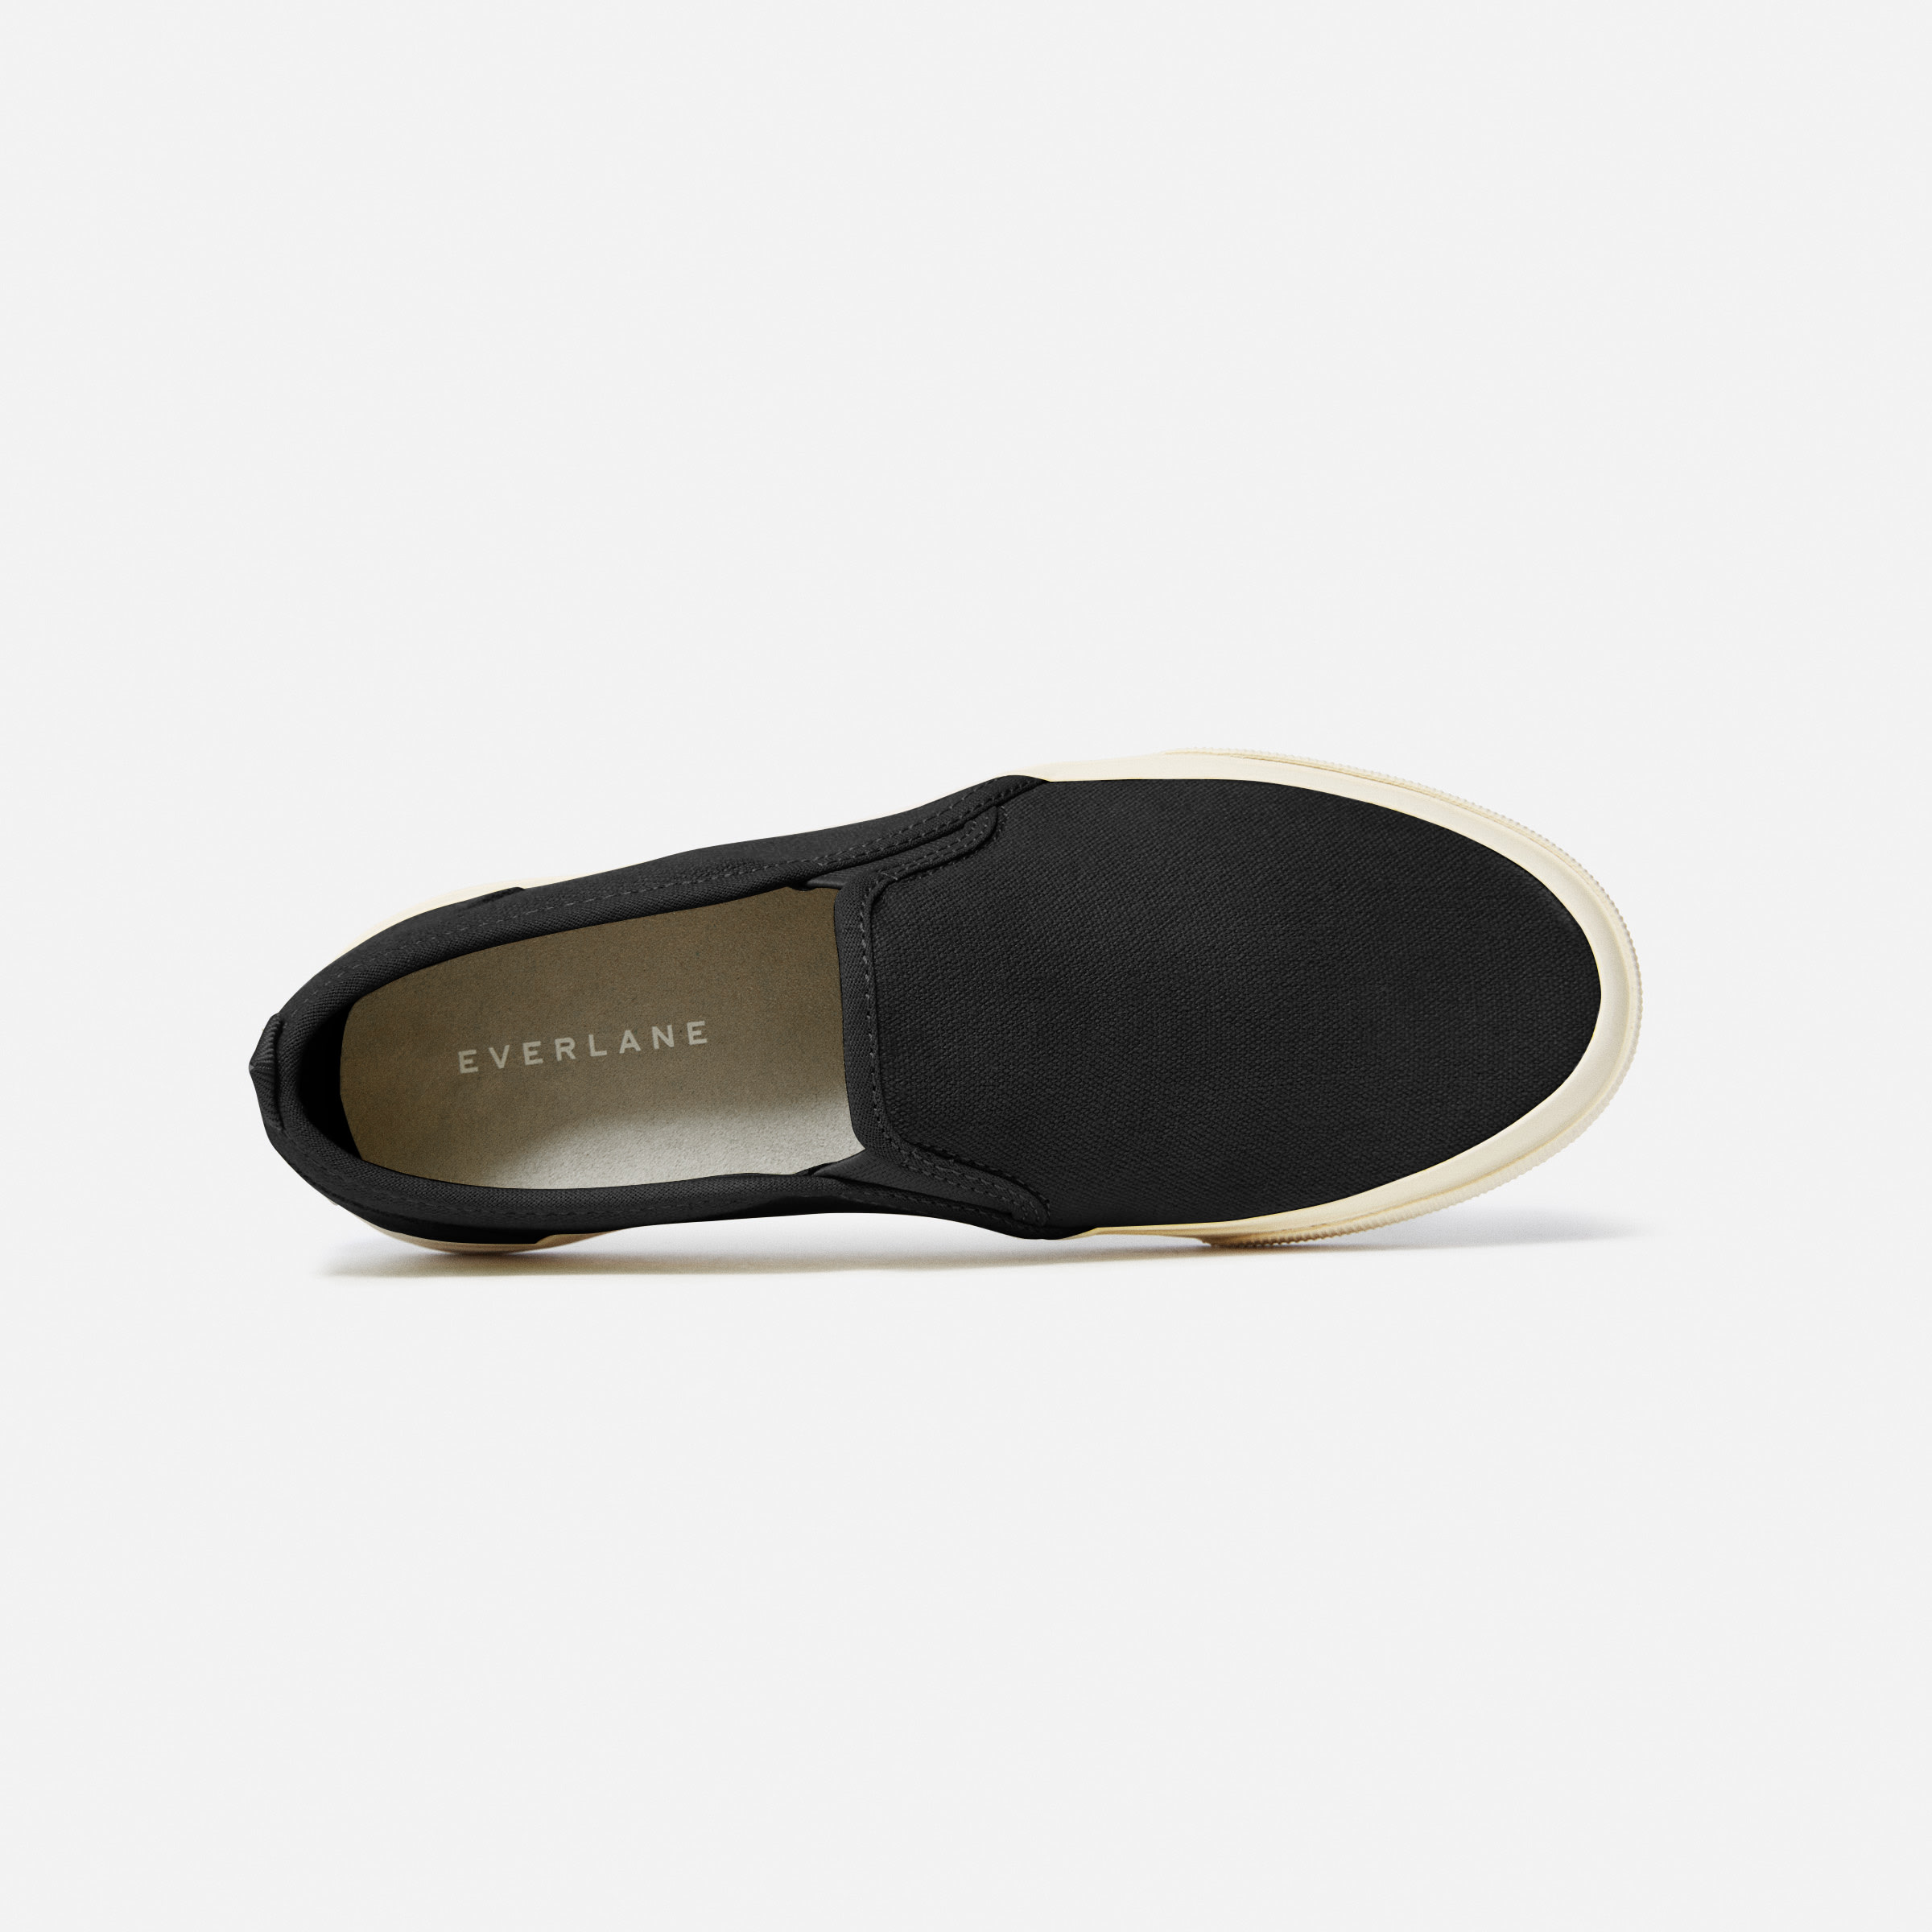 Everlane the Forever Slip-on Sneaker Review With Photos